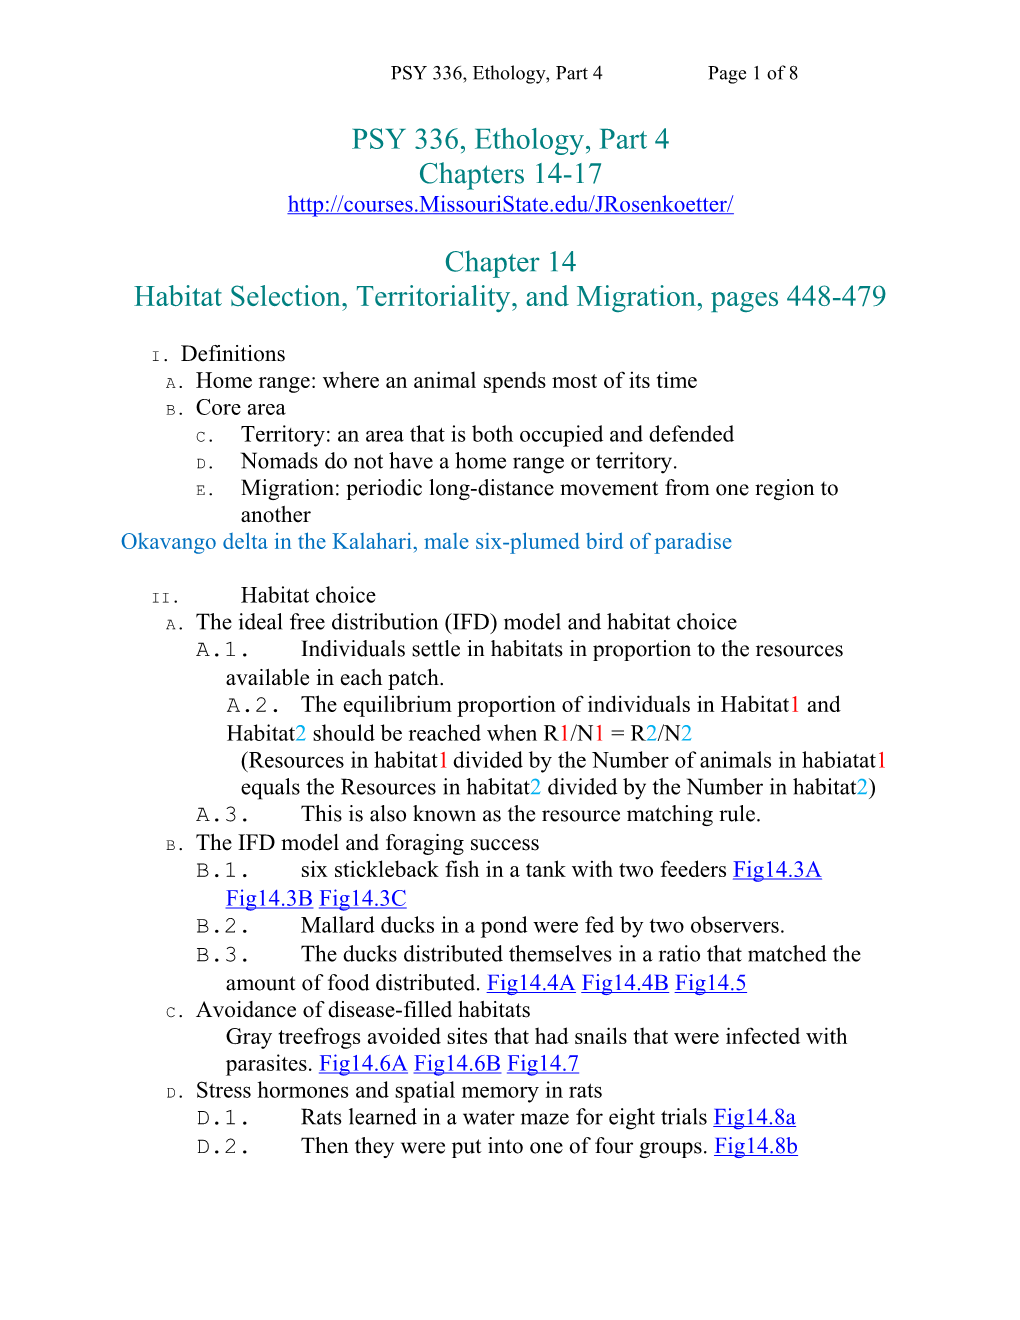 PSY 336, Ethology, Part 4 Page 1 of 10